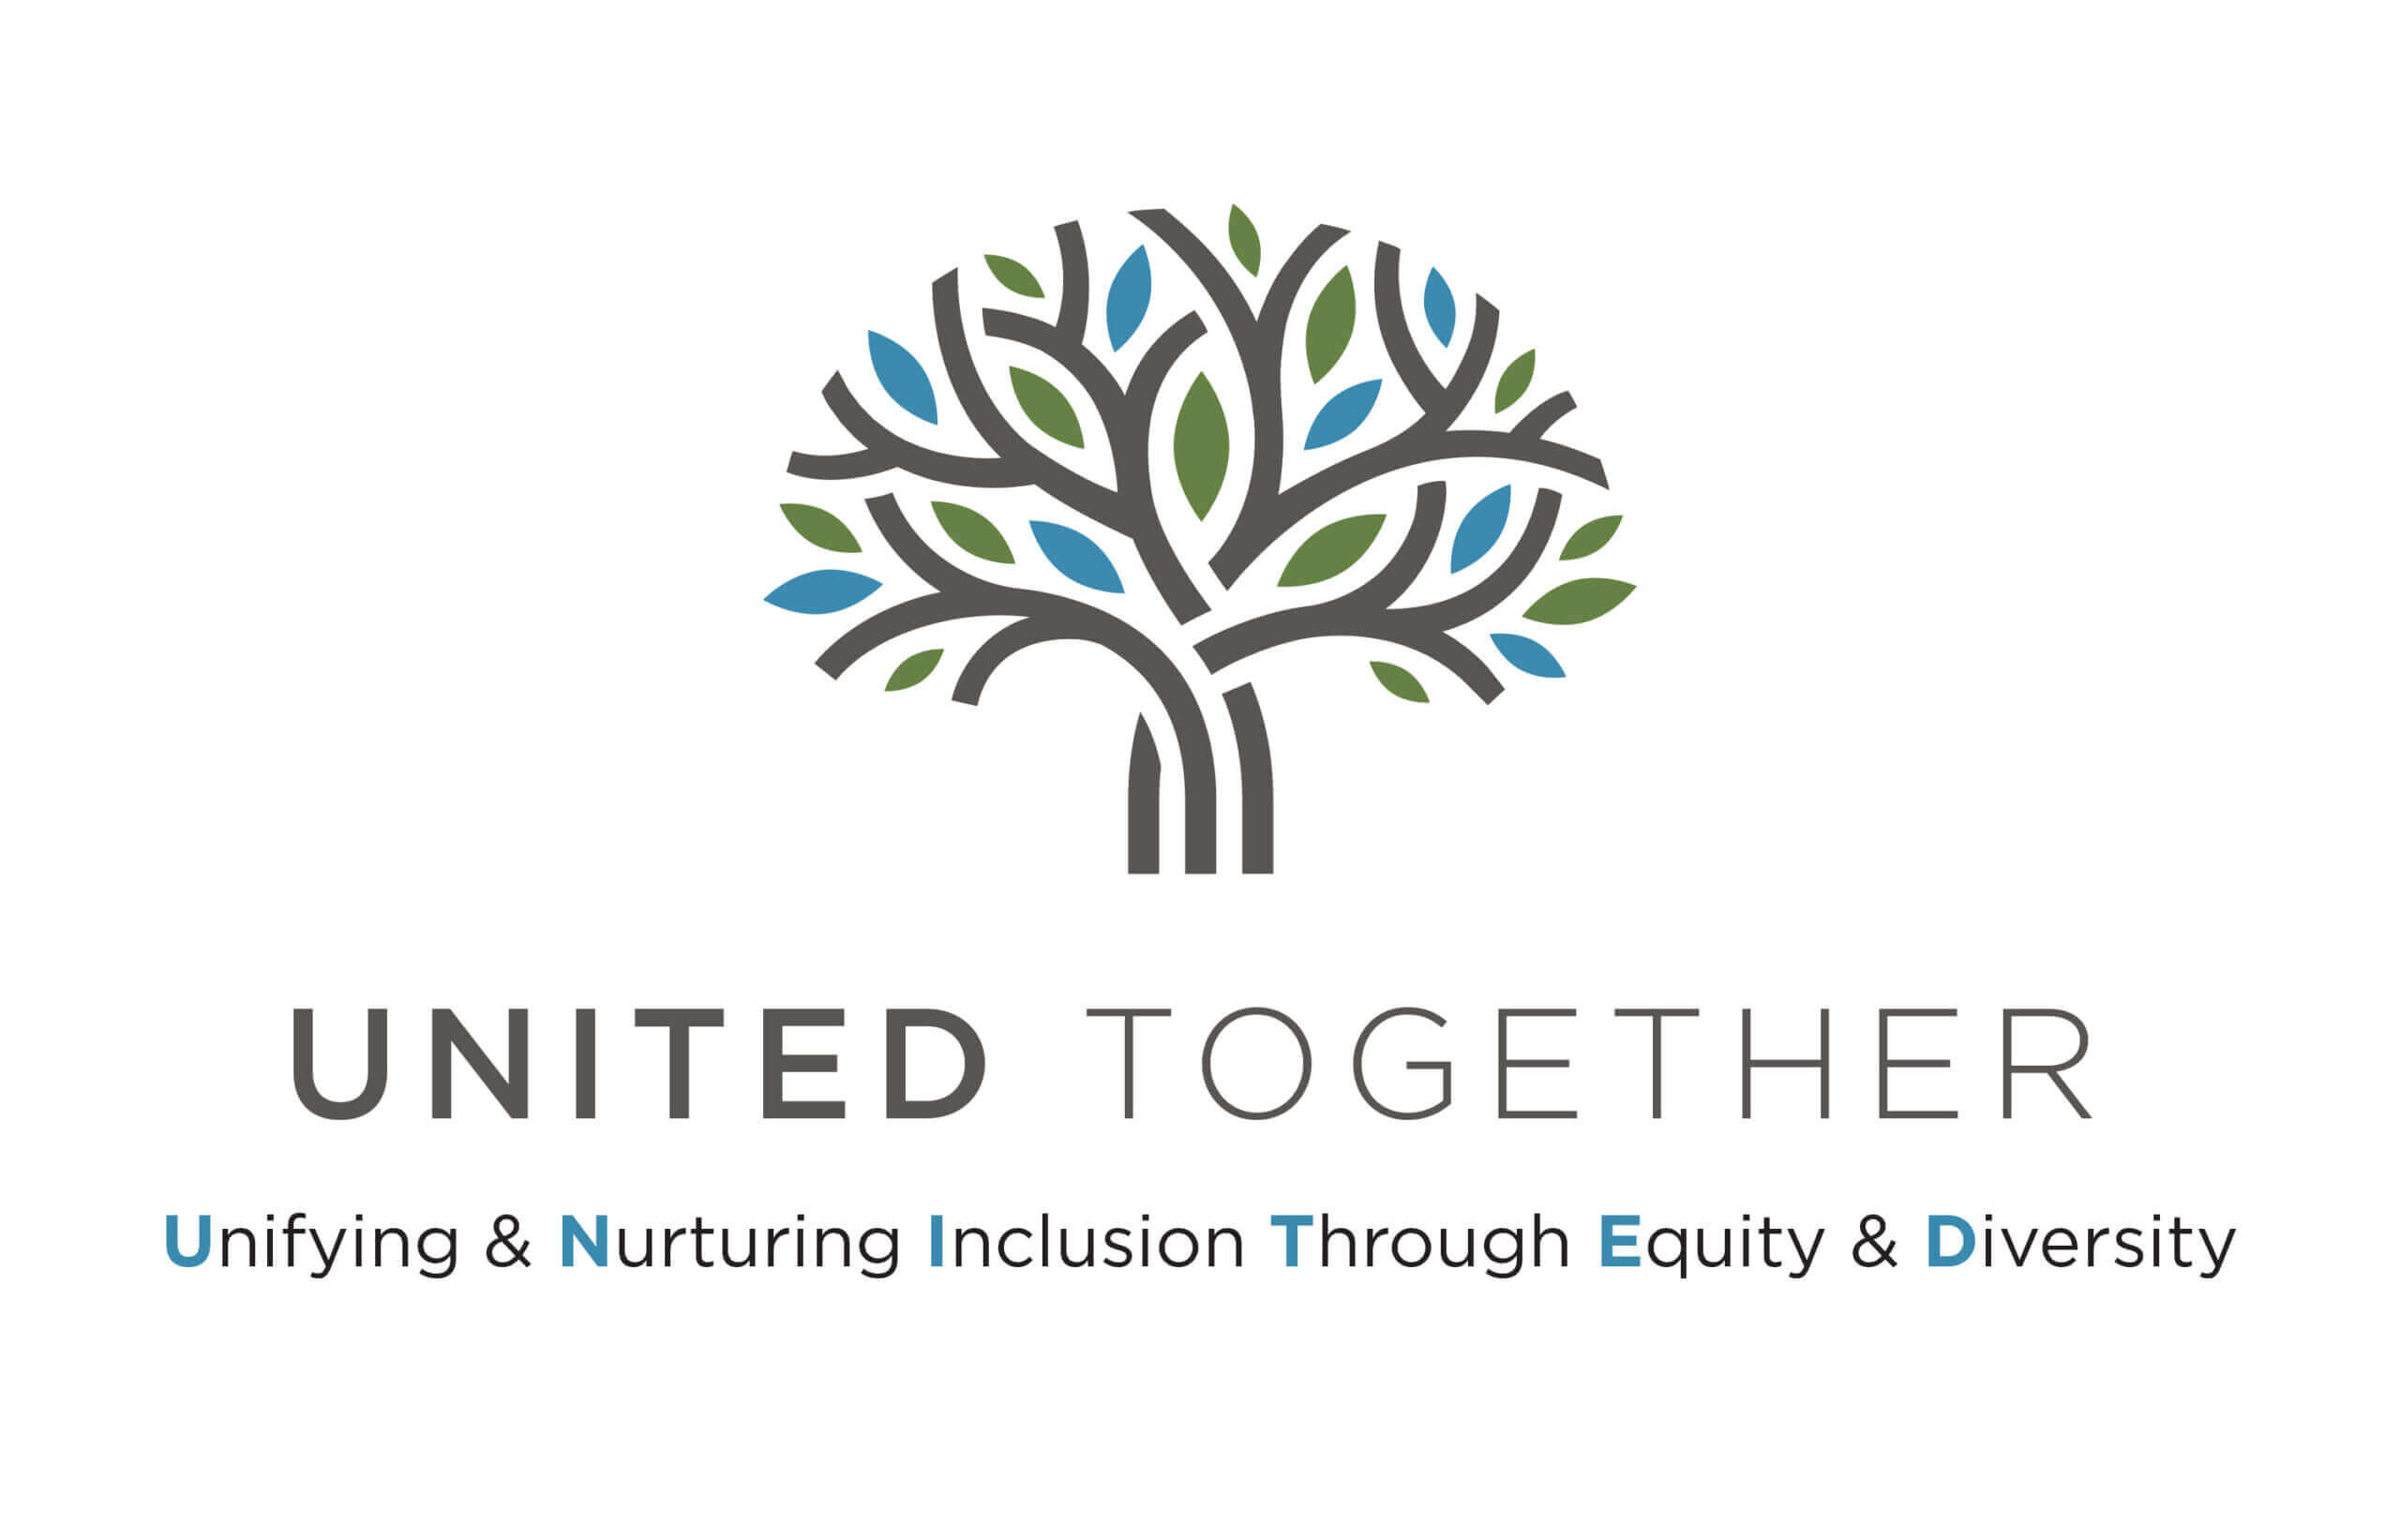 United Together - Unifying & Nurturing Inclusion Through Equity & Diversity